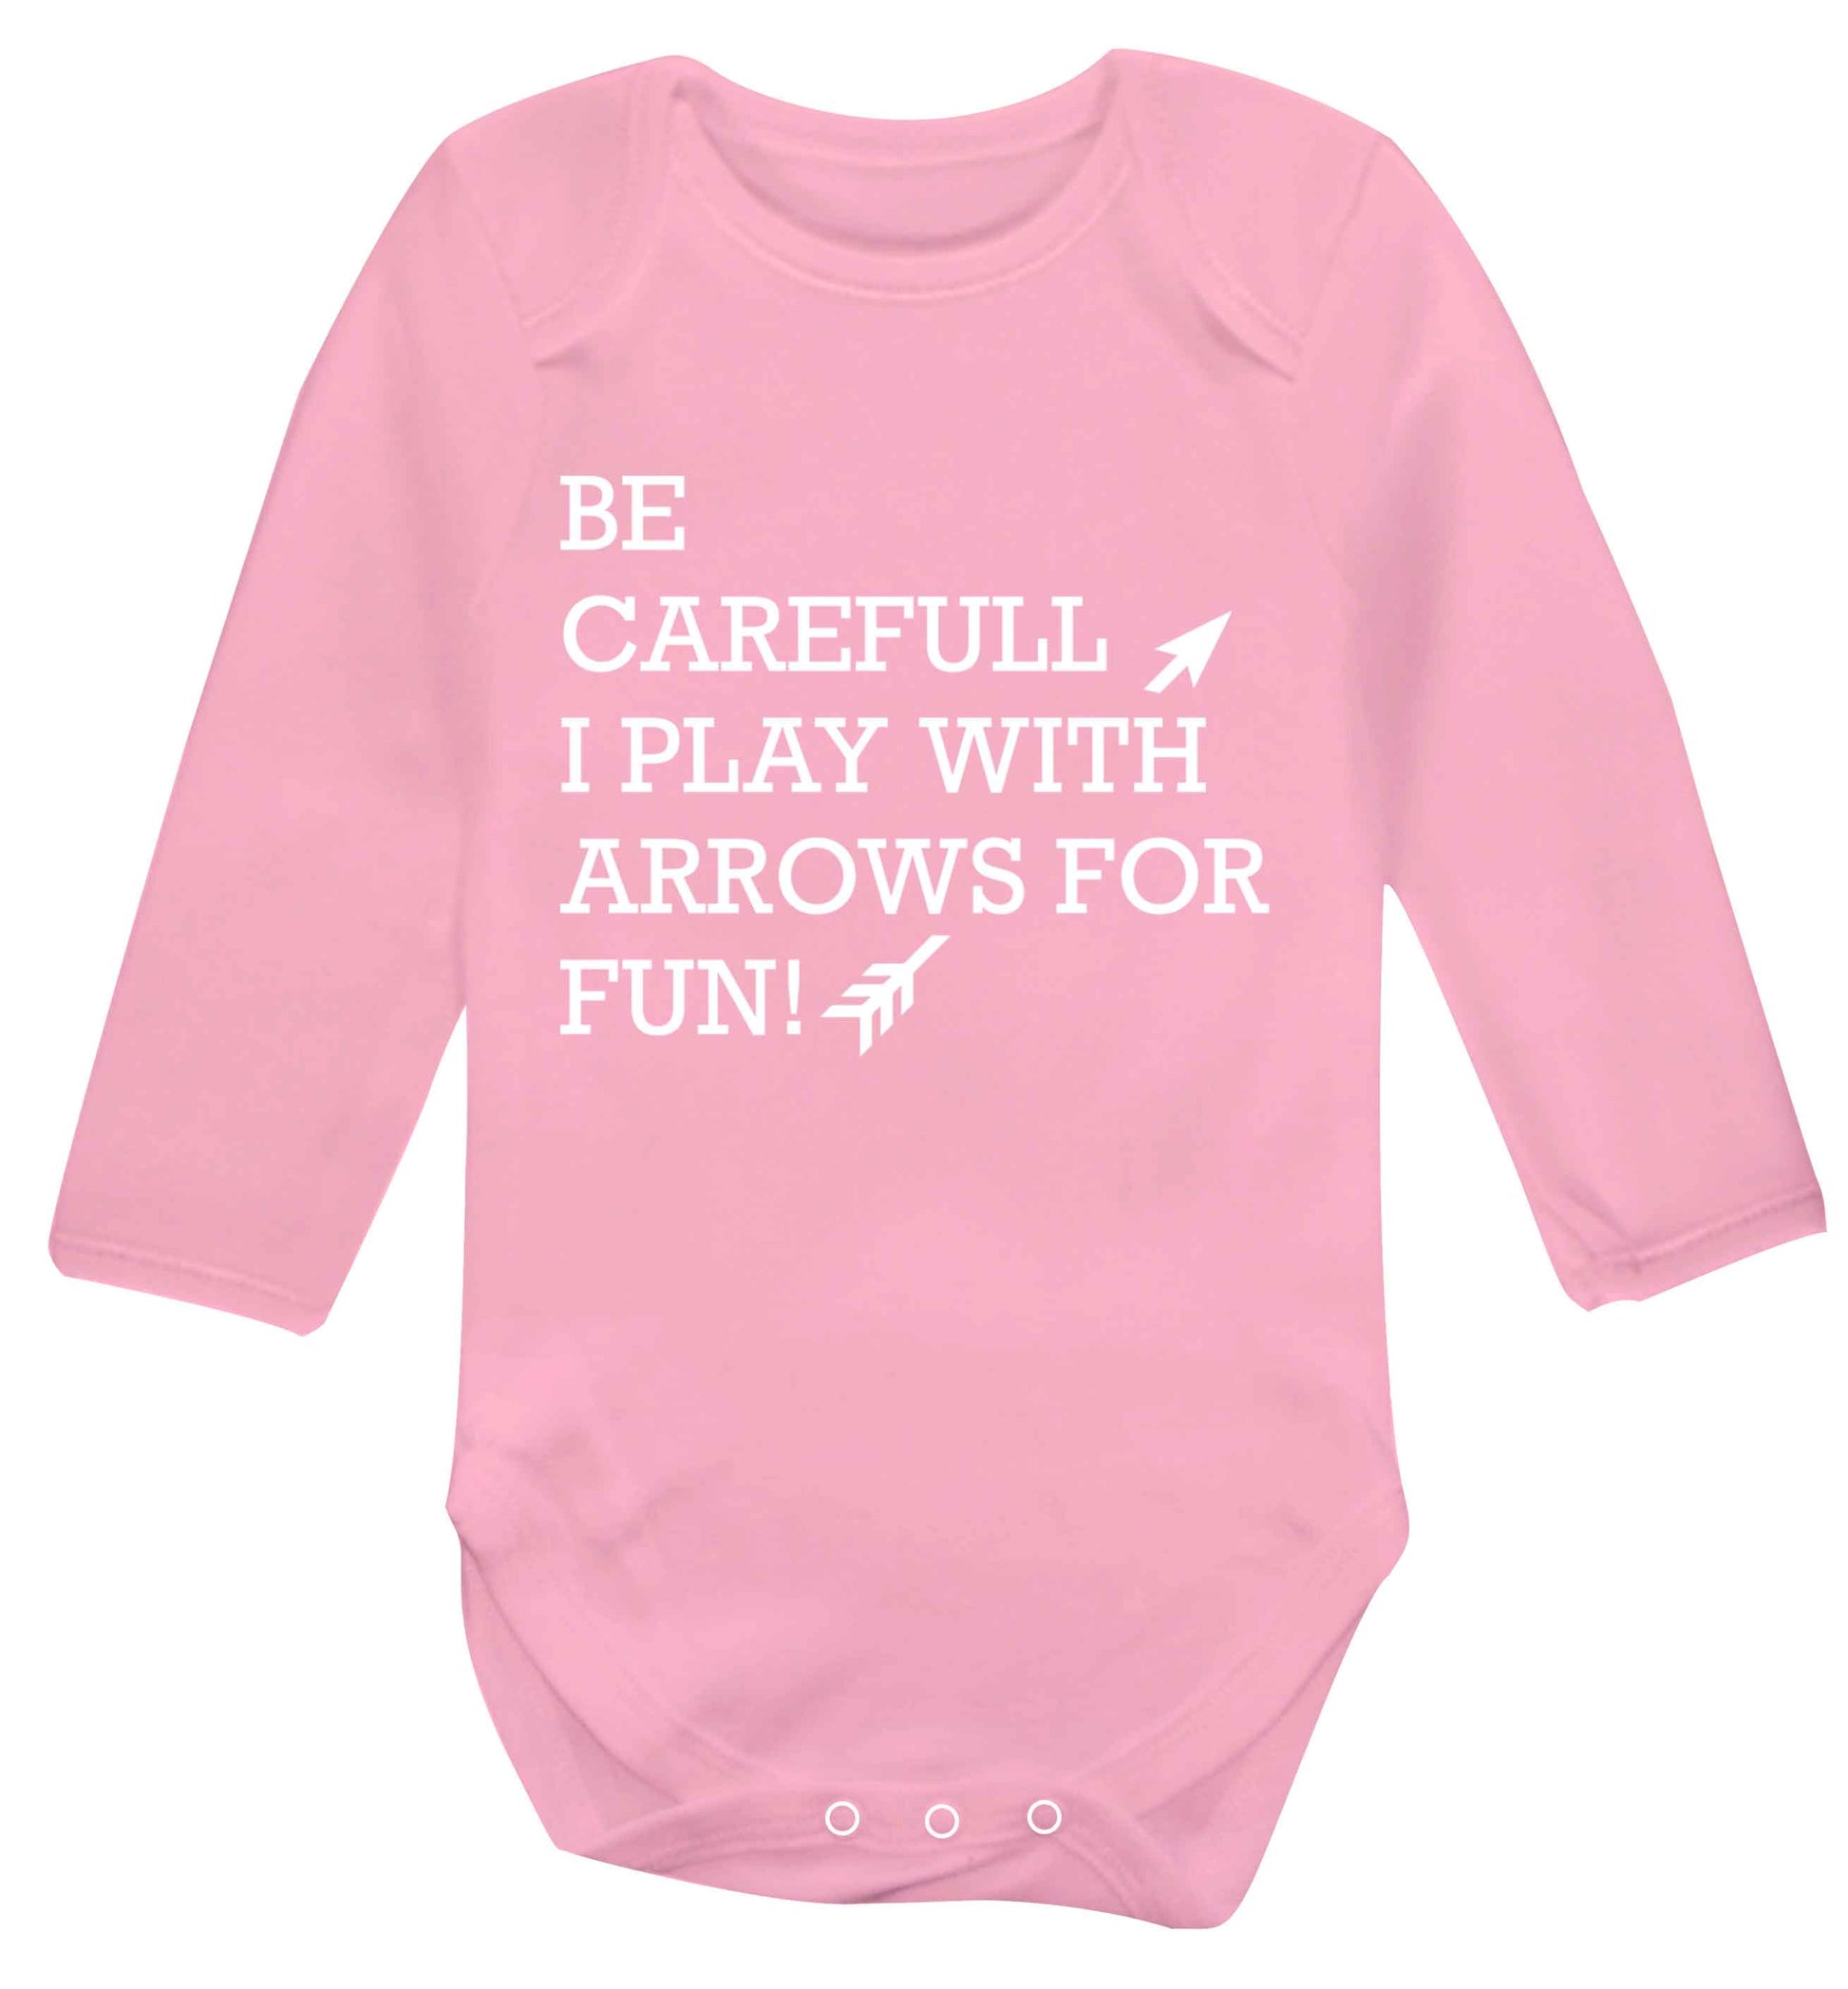 Be carefull I play with arrows for fun Baby Vest long sleeved pale pink 6-12 months